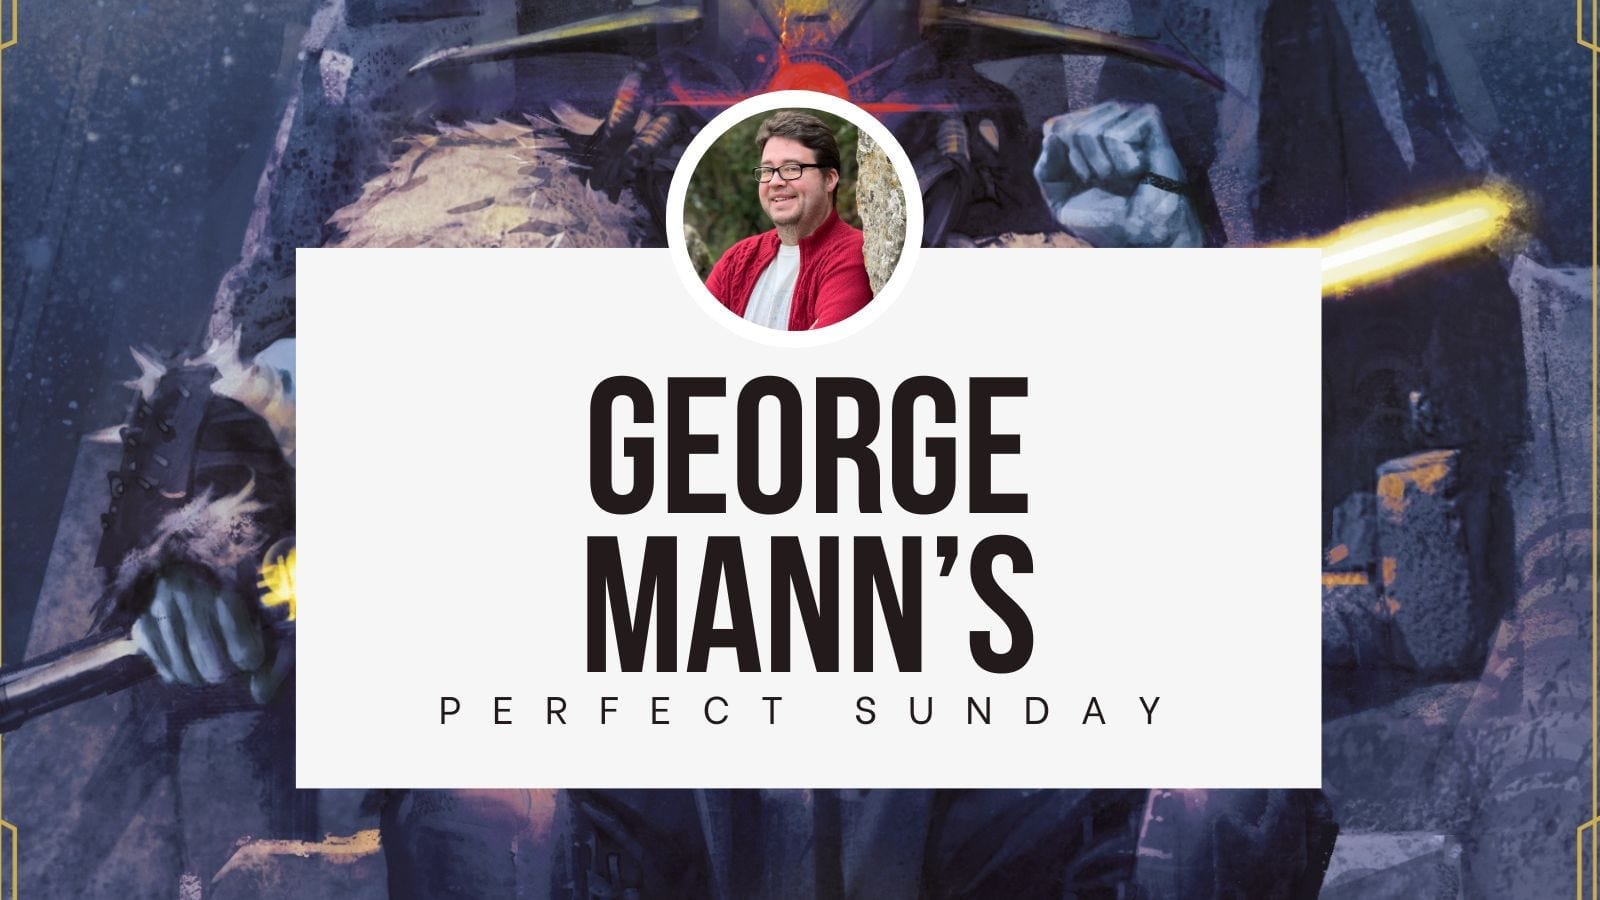 A perfect Sunday with... George Mann